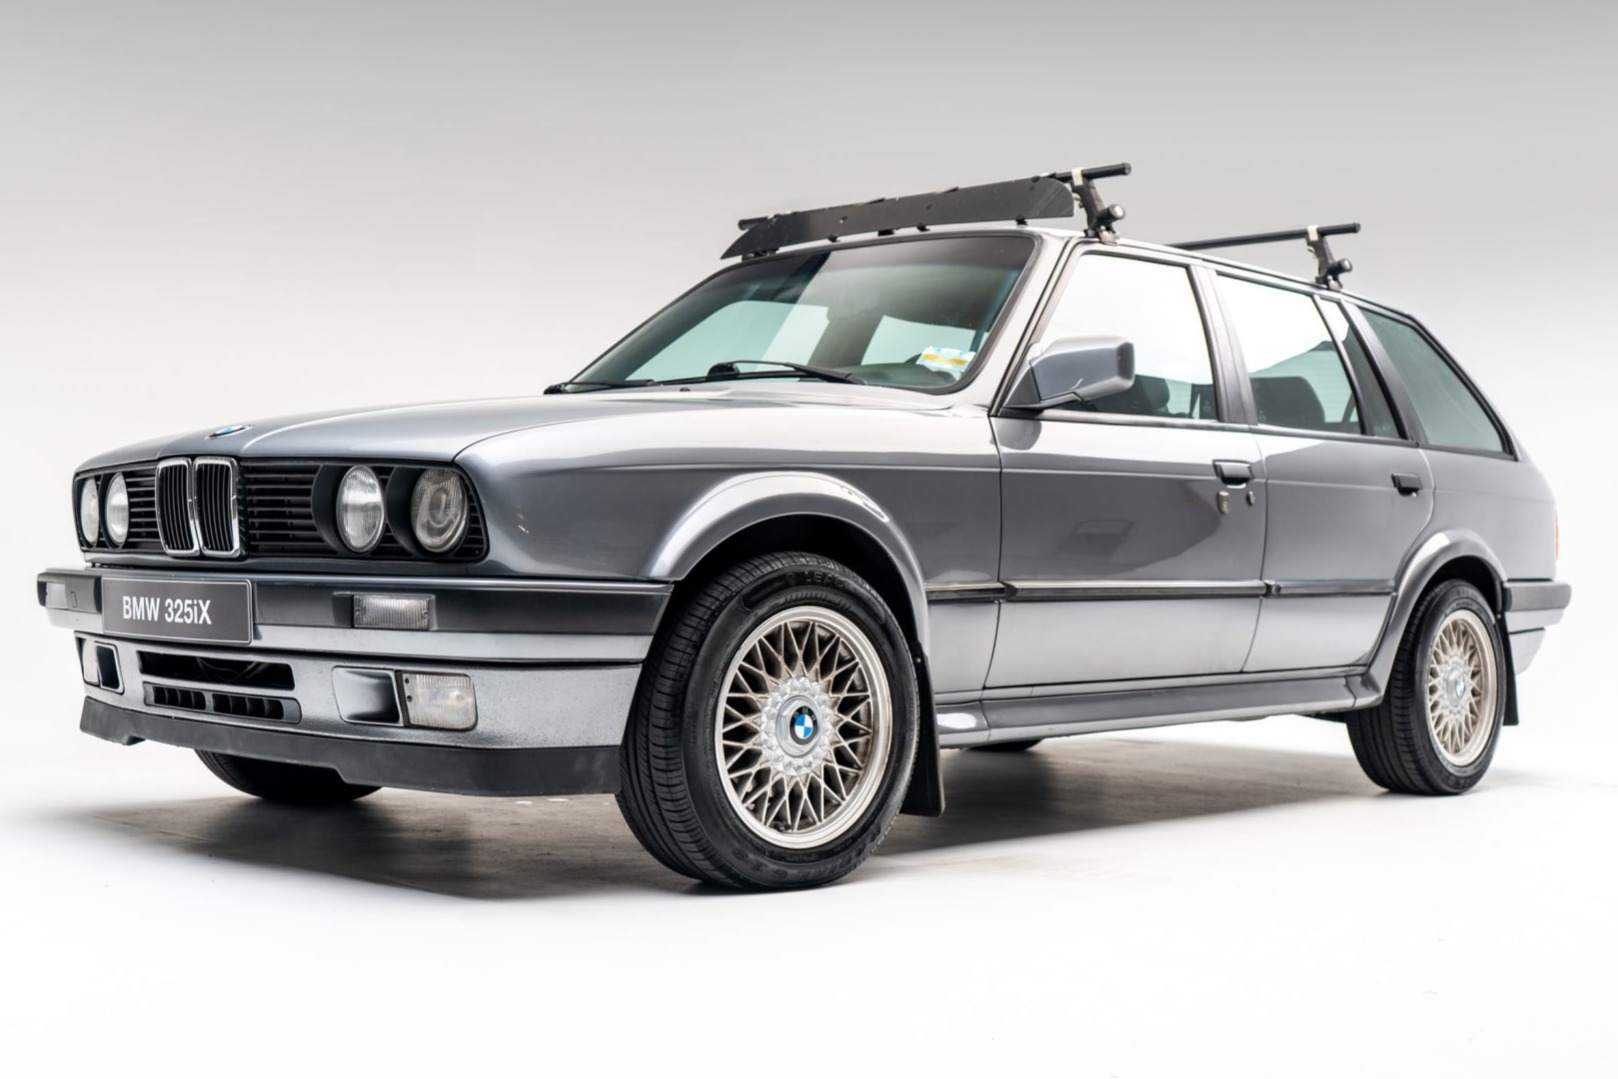 Used 1991 BMW 325iX Touring Review